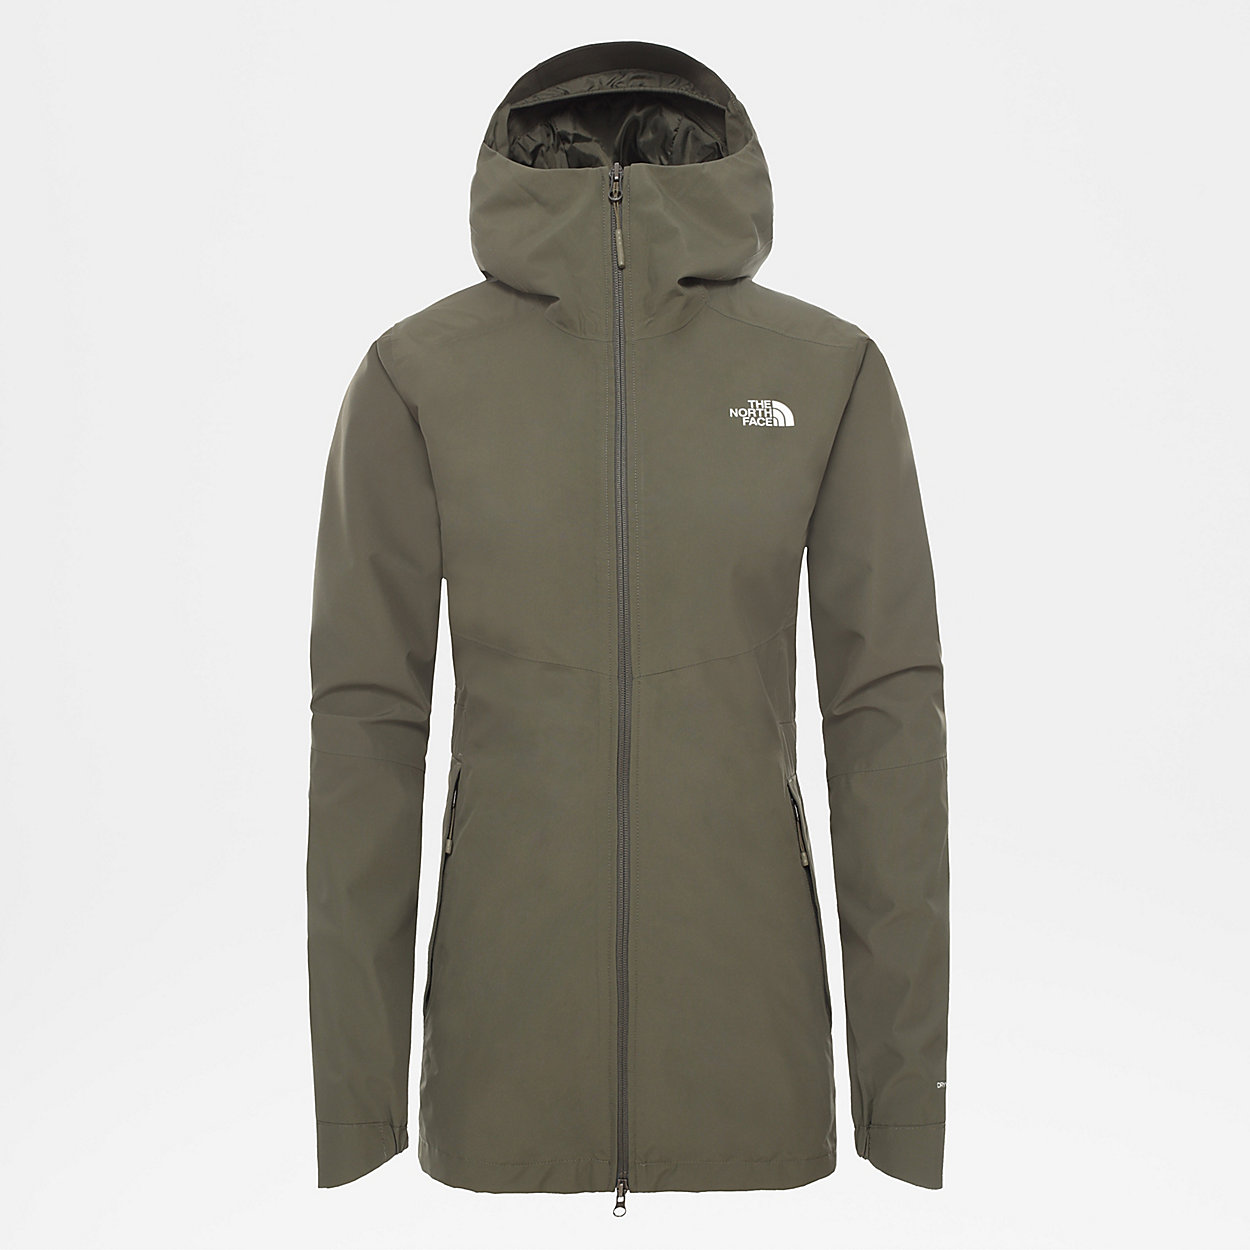 Unlock Wilderness' choice in the Trespass Vs North Face comparison, the Hikesteller Parka Shell Jacket by The North Face